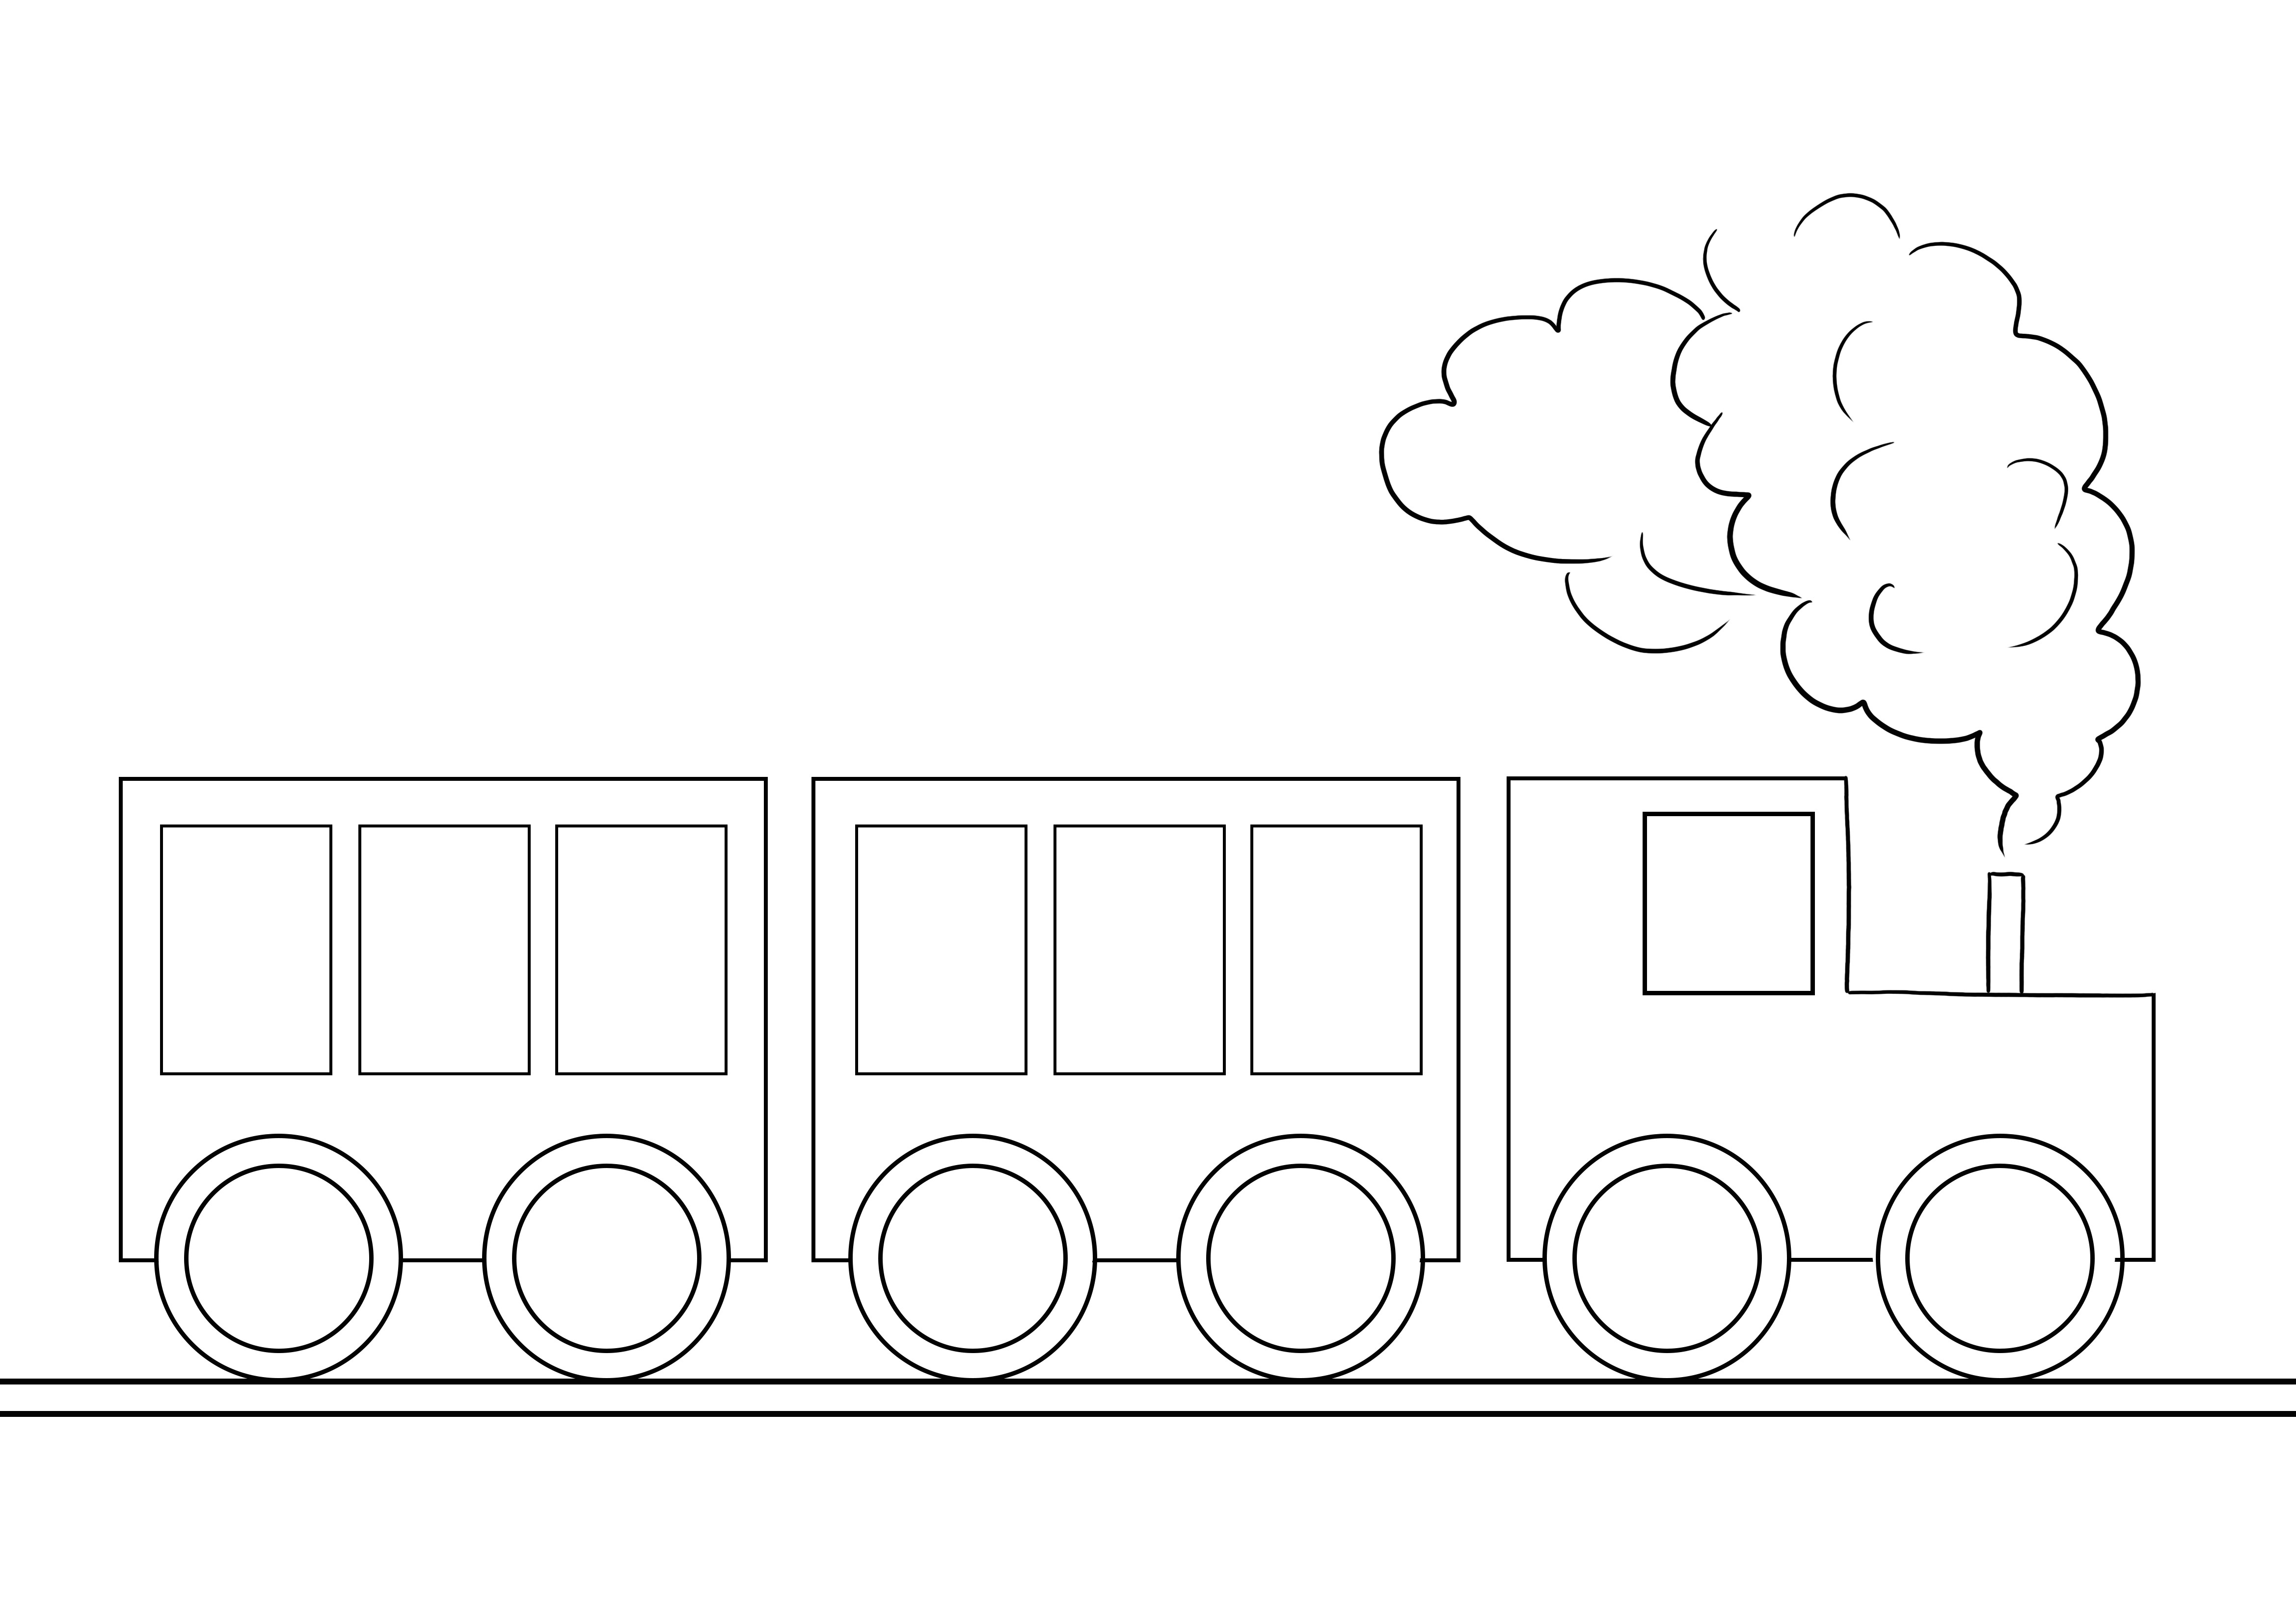 A very simple coloring picture of a train to print or download for free